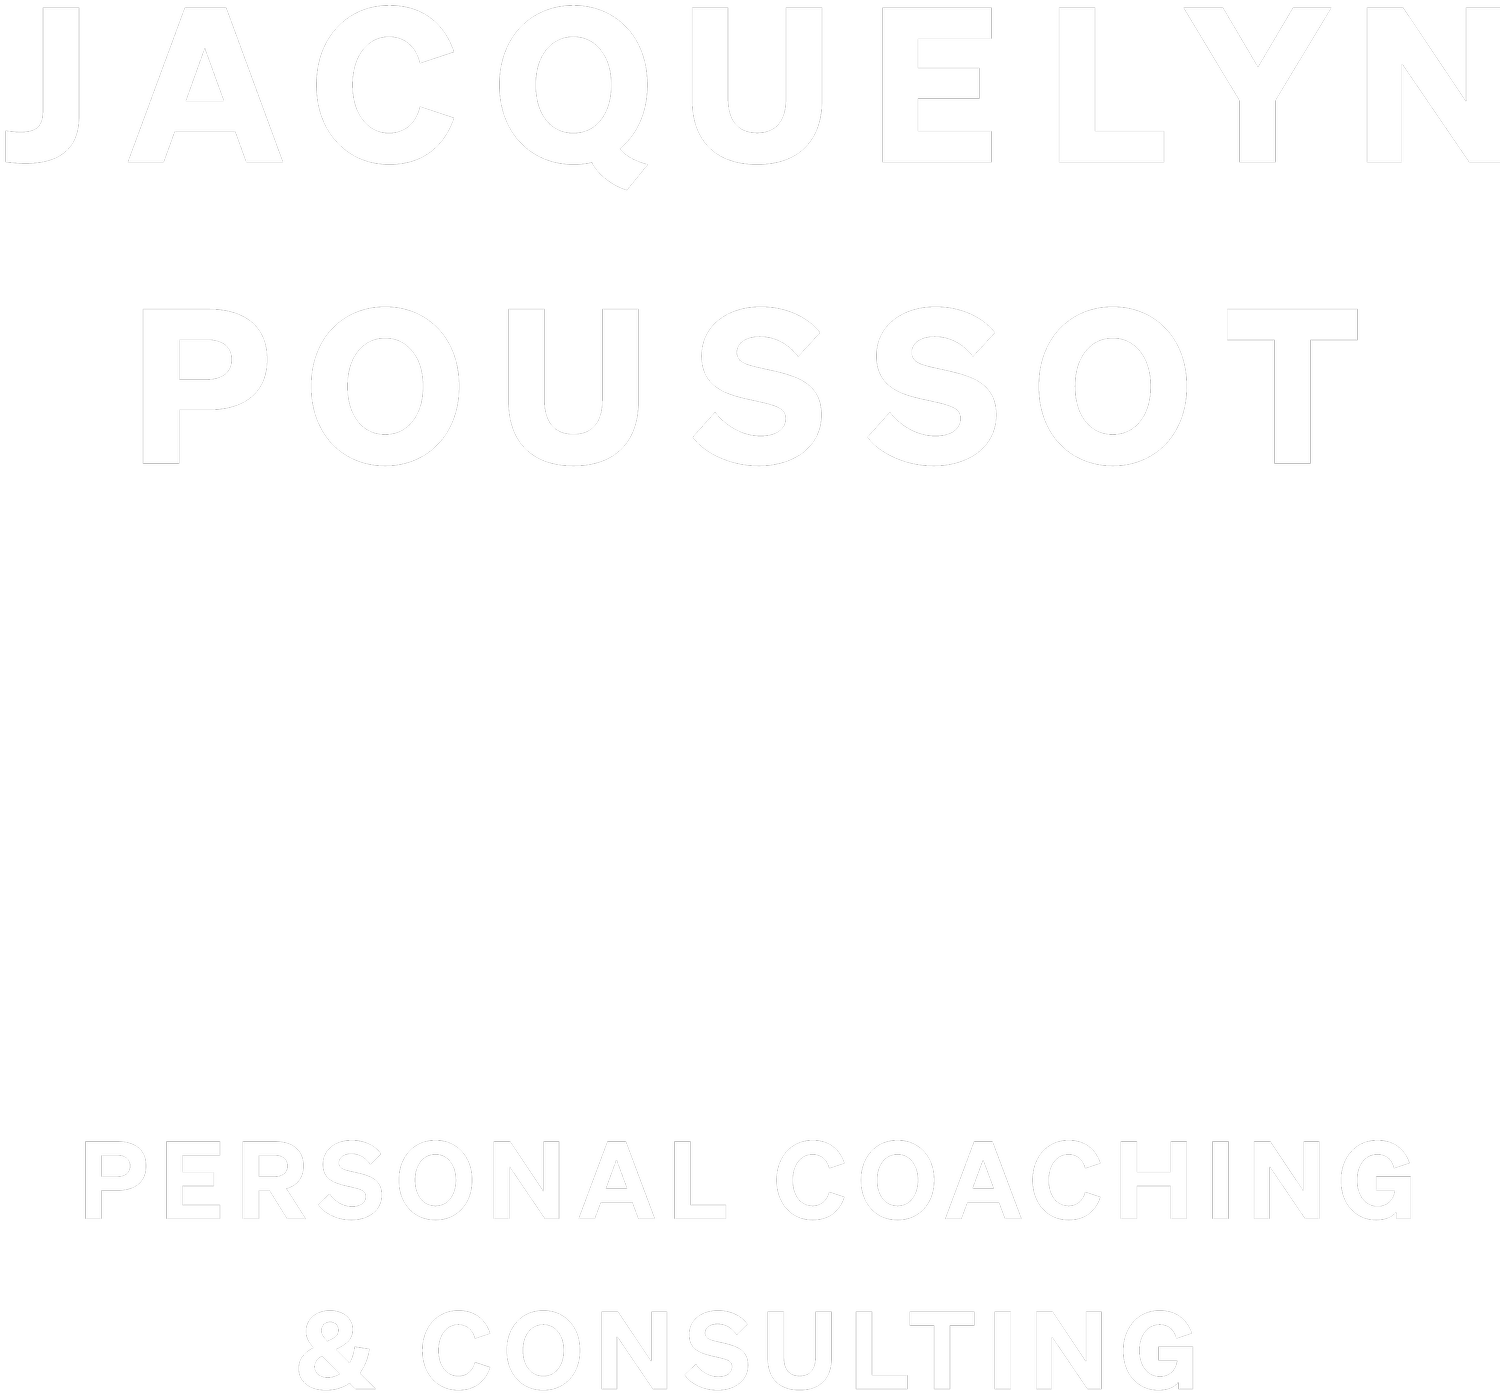 Jacquelyn Poussot: Personal Coaching &amp; Consulting